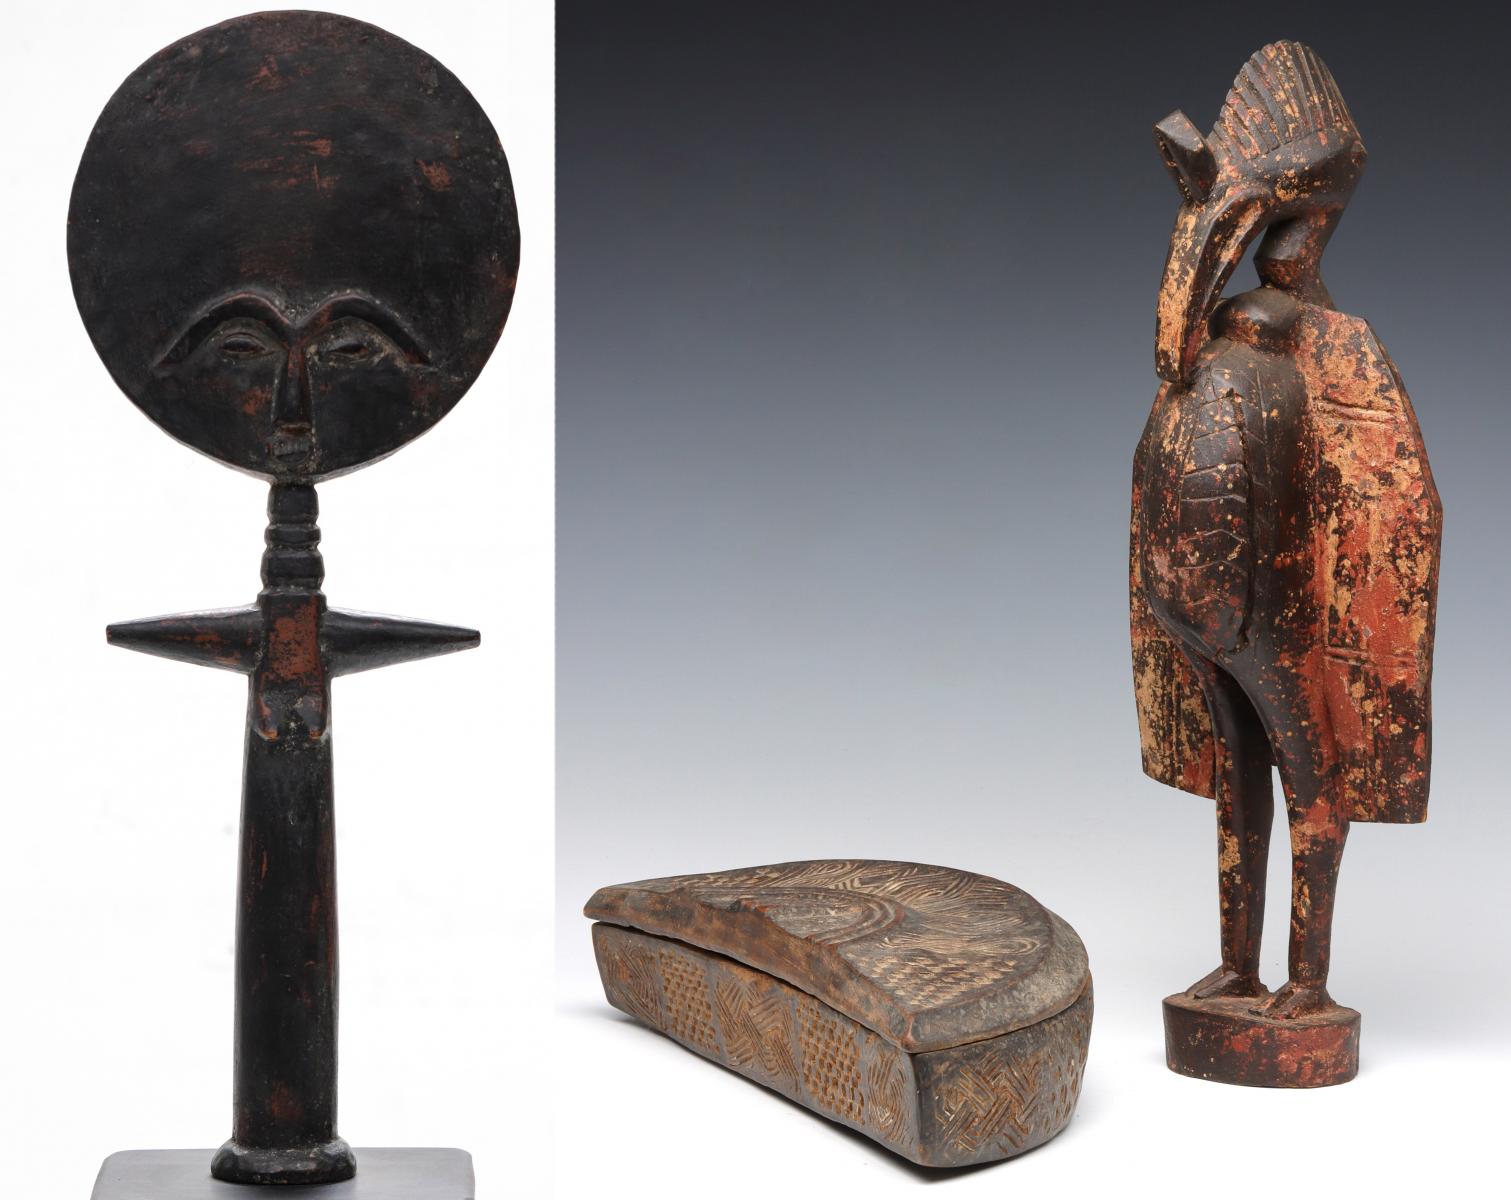 AN ASHANTI FERTILITY FIGURE AND OTHER AFRICAN OBJECTS